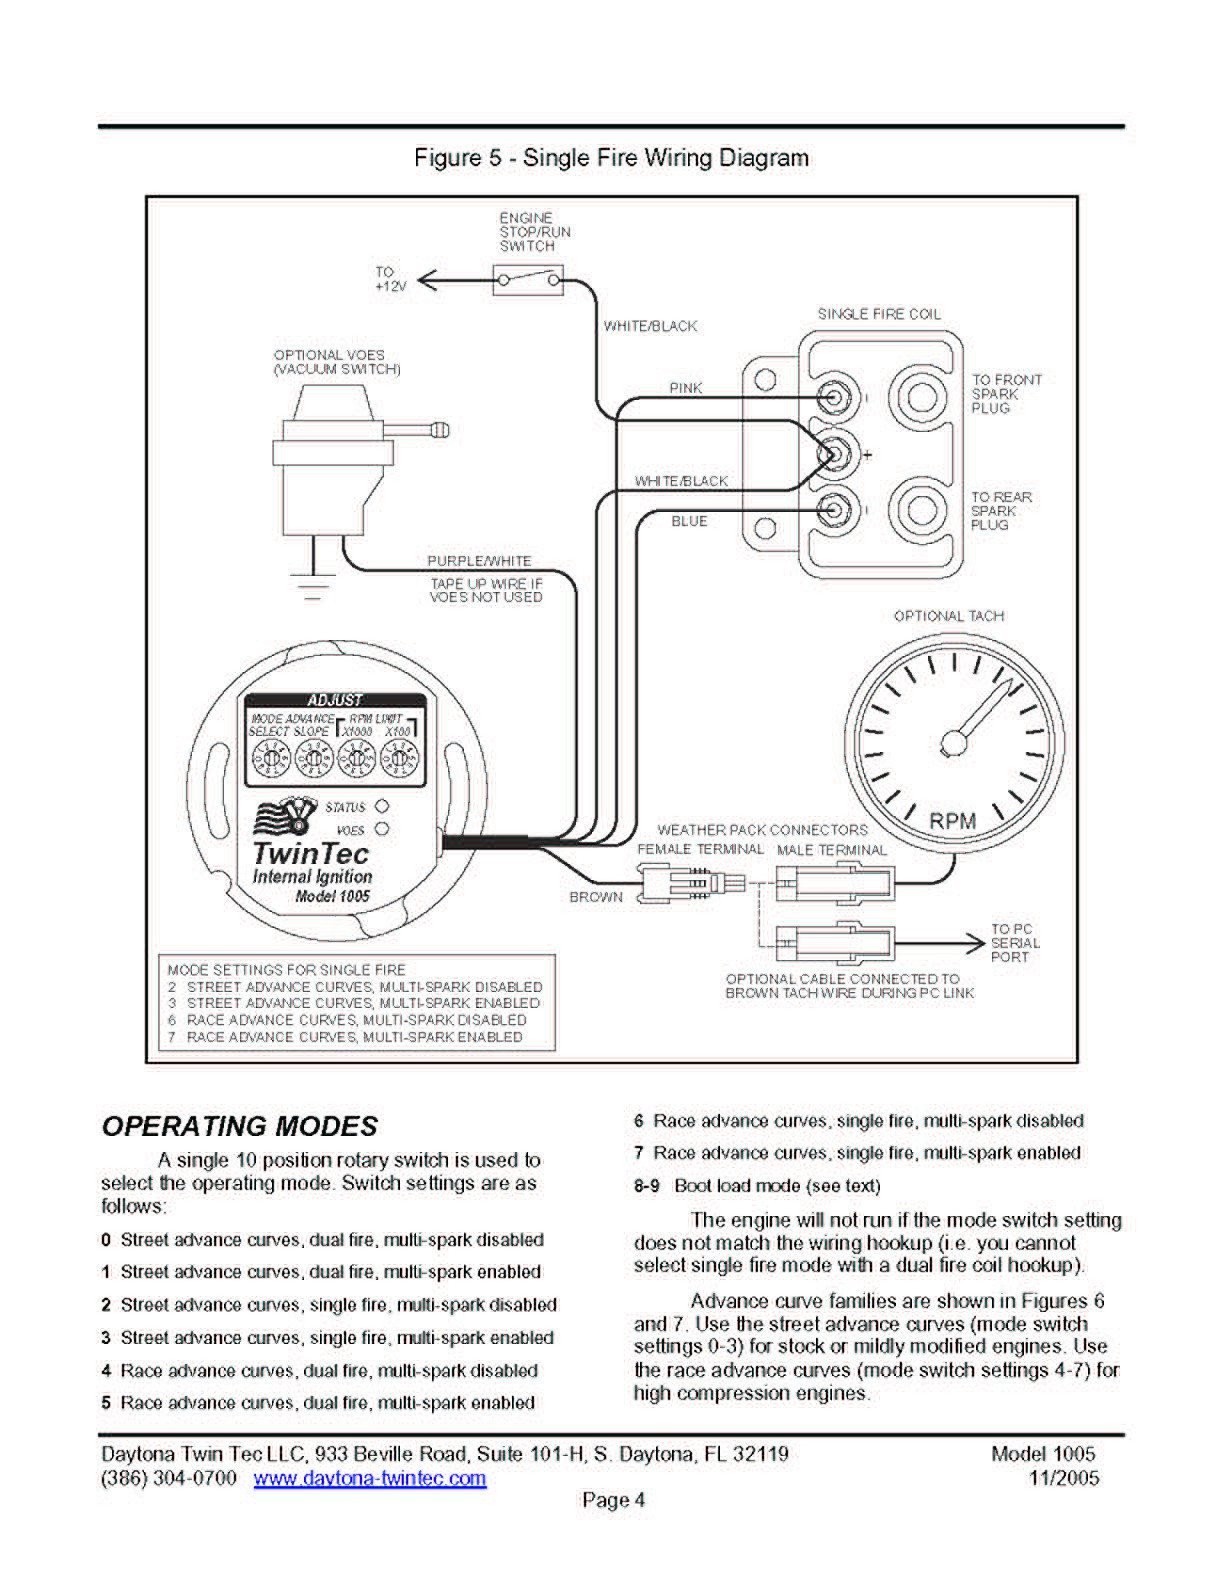 dyna s ignition wiring diagram electrical wiring diagrams rh cytrus co dyna s dual fire ignition wiring diagram dyna s wiring diagram